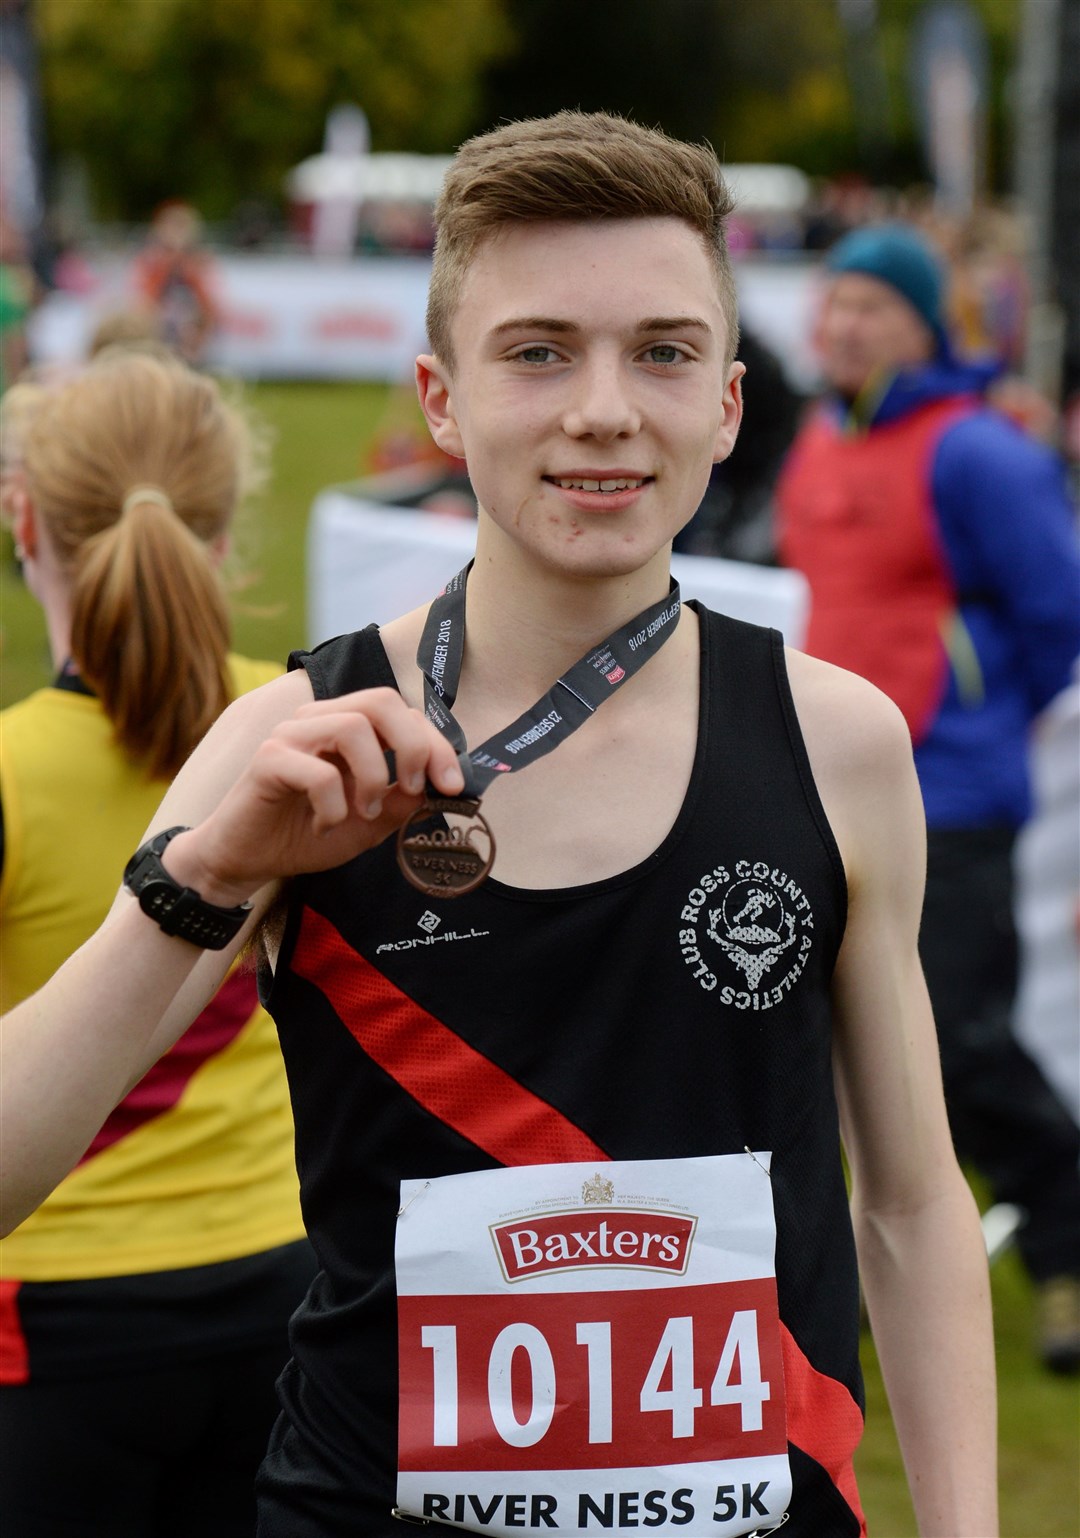 Hamish Hickey pictured after winning the River Ness 5k in 2018.